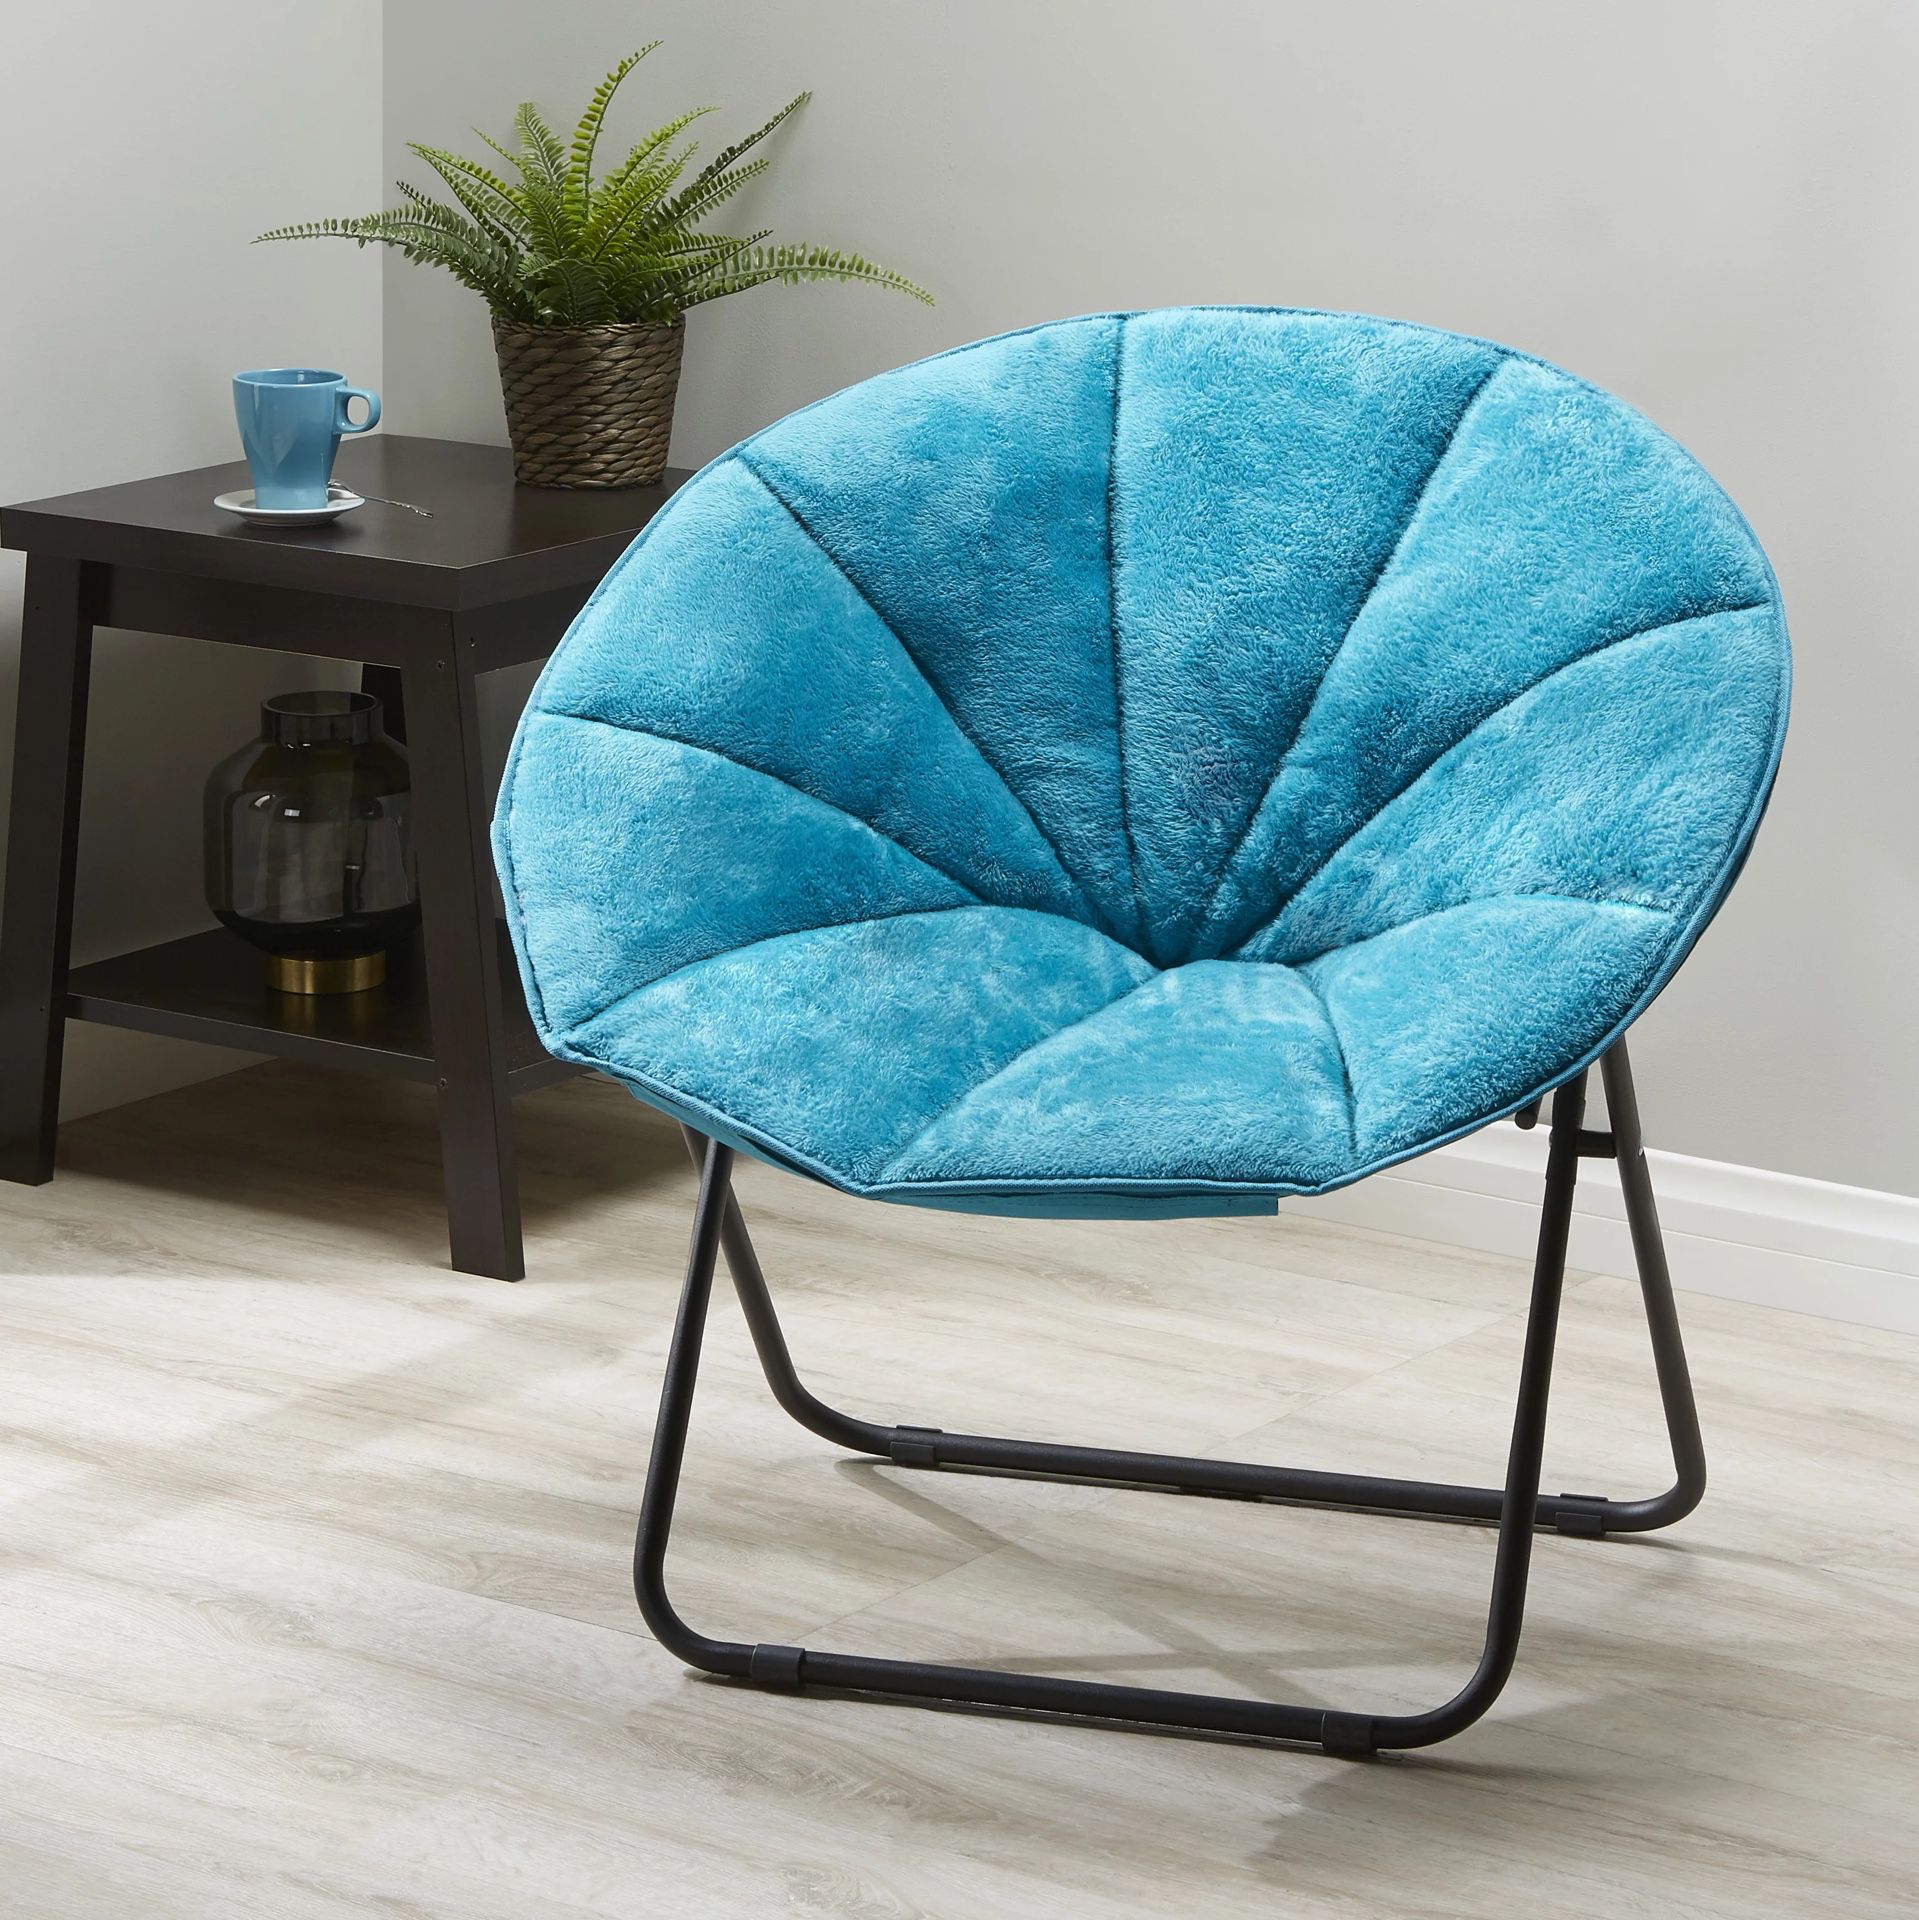 Mainstays Plush Saucer Chair, Blue Blue - 30in W*26.4in D*28in H